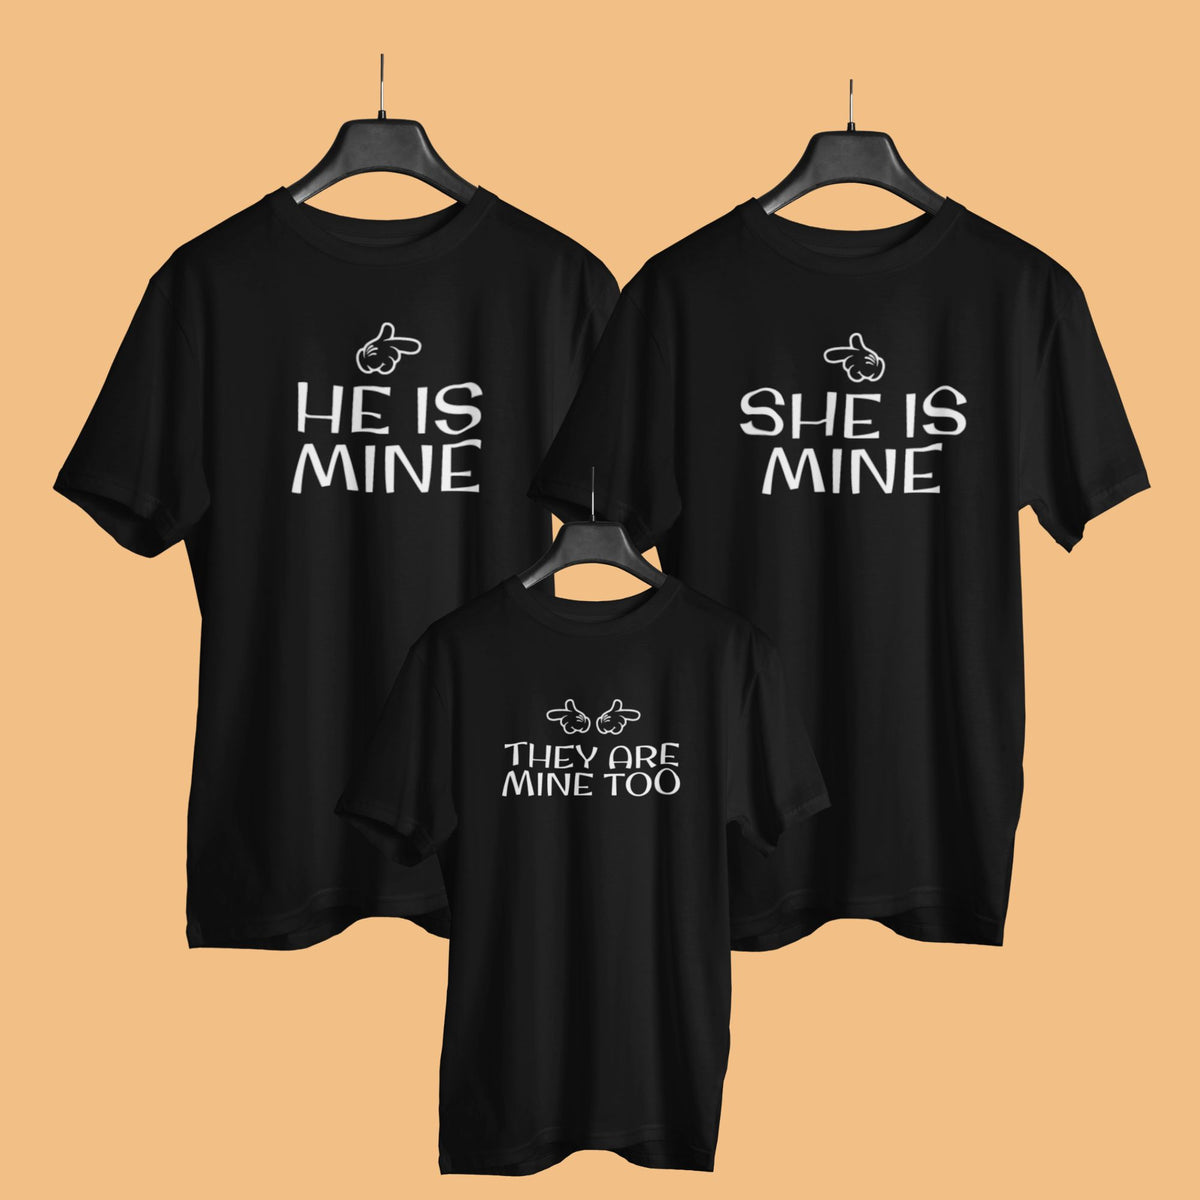 he-is-mine-matching-family-black-t-shirts-for-mom-dad-son-daughter-gogirgit-hanger